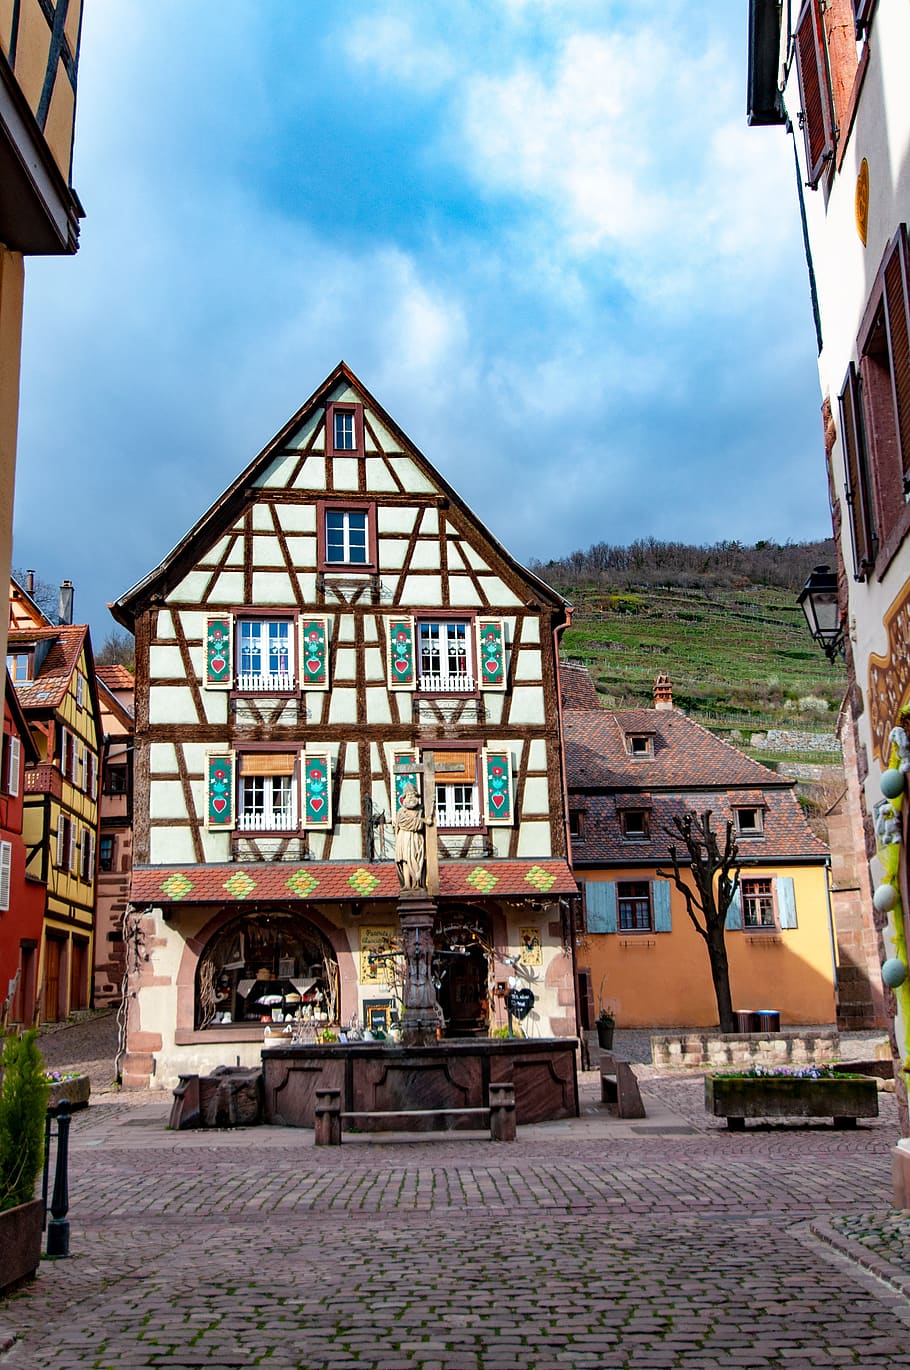 village, france, town, house, kamienica, façades, provence, alsace, french, old